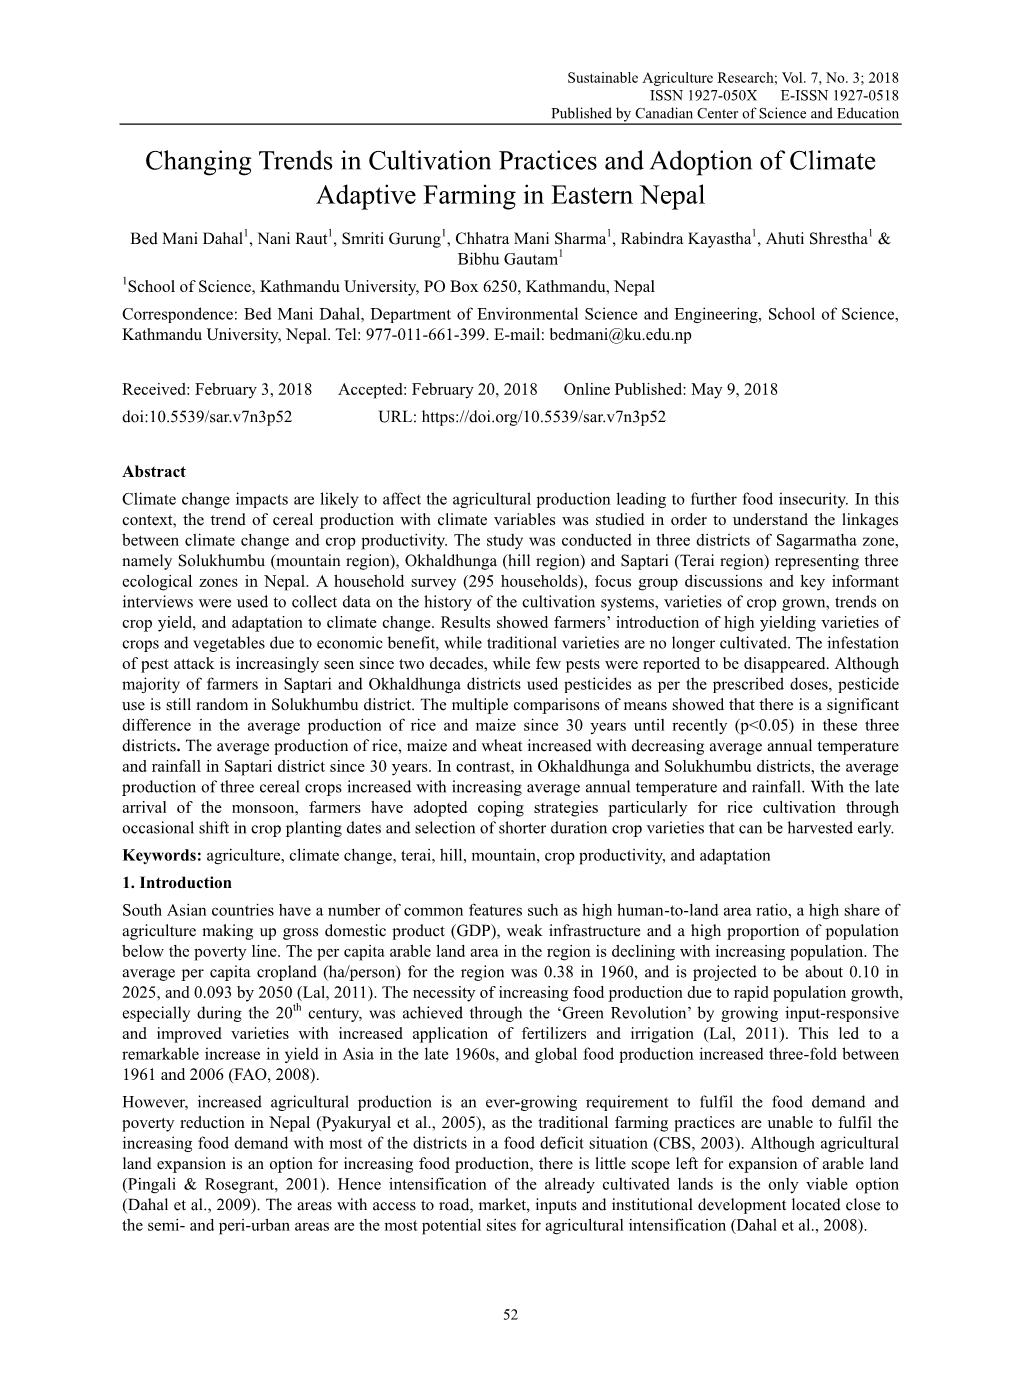 Changing Trends in Cultivation Practices and Adoption of Climate Adaptive Farming in Eastern Nepal